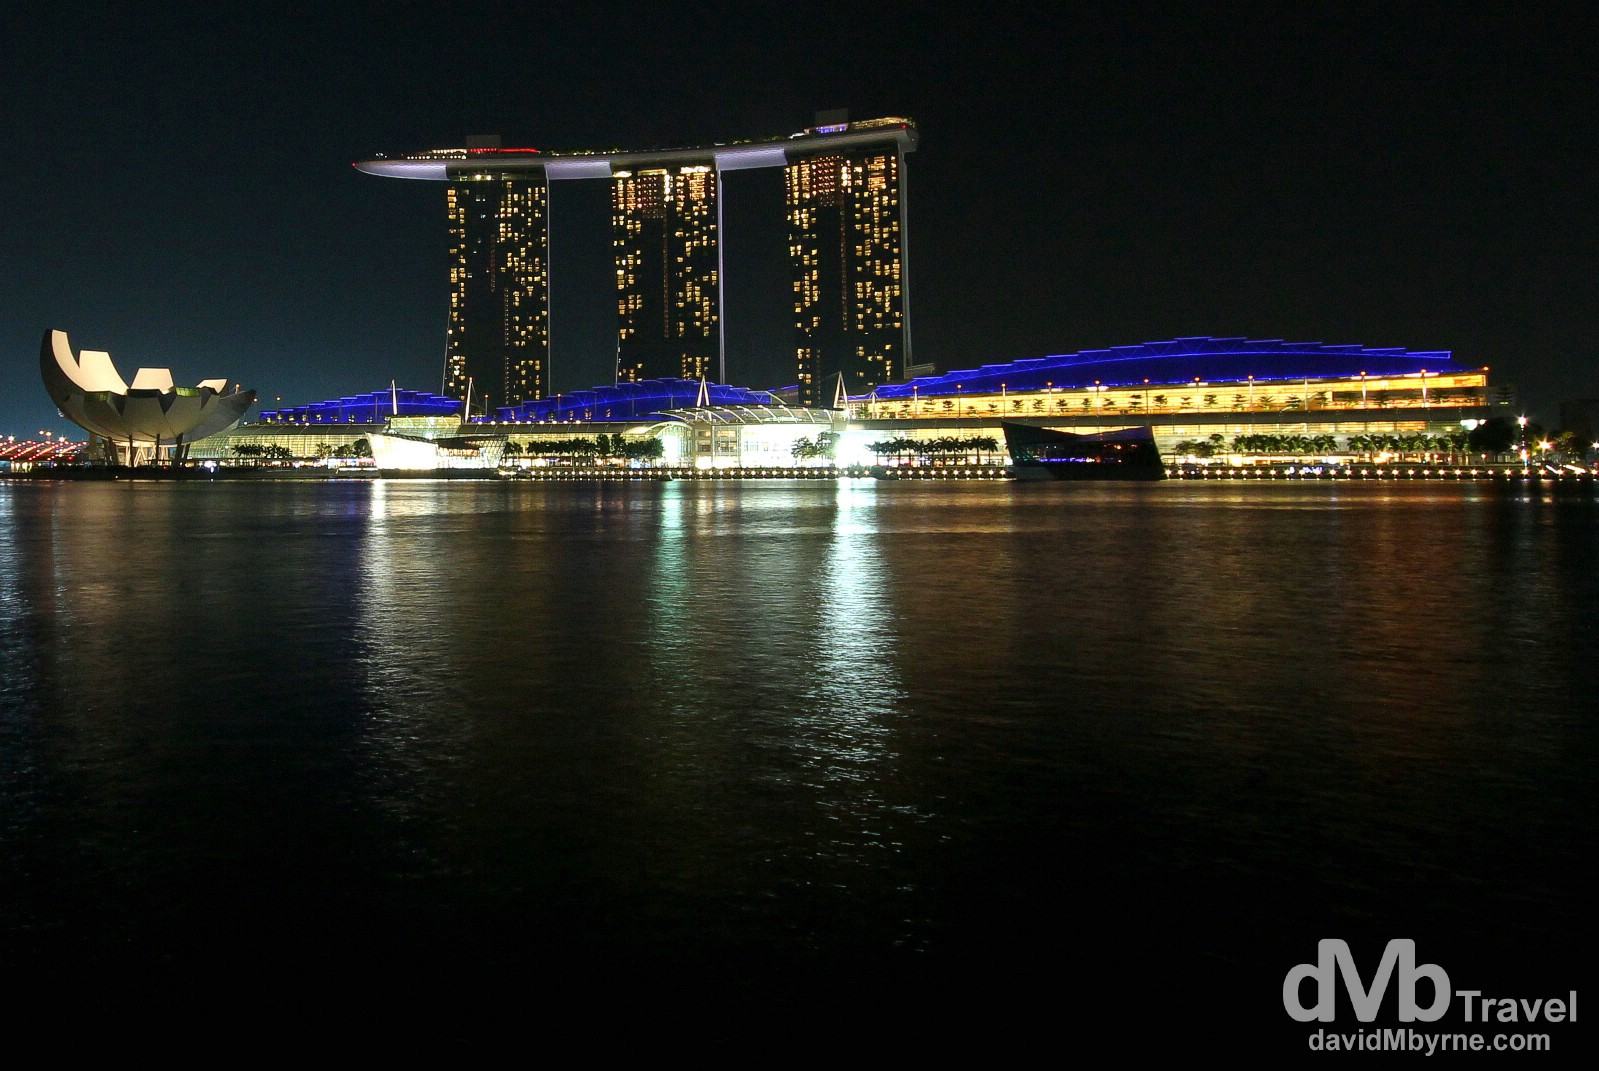 The lotus-shaped Arts & Science Museum (left), the Marina Bay Sands Hotel (centre) & the Shoppes At Marina Bay Sands (right), as seen from the waterfront of Marina Bay in the Singapore Central Business District (CBD). The hotel, one of the newest features of the ever-changing Singapore skyline, features three 55-storey hotel towers which are connected by a 340 metre, 1 hectare sky terrace on the roof, named Sands SkyPark. The SkyPark, perched 191 metres above the ground, has the capacity to hold 3,900 people. It's only the world's largest public cantilevered platform & is home to a 134-meter (478 ft) infinity pool, the world's longest elevated swimming pool, rooftop restaurants, gardens, palm trees & an observation deck. The Marina Bay Sands itself is a lot of things - a hotel, a casino, an upscale shopping arcade (Shoppes At Marina Bay Sands), a convention centre etc. - but at its core it's somewhere to spend an awful lot of money. Originally set to open in 2009, delays & budget overruns (it was budgeted at SGD$3 billion (€1.8b) but actually ended up costing SGD$8 billion (€4.7), making it the world's most expensive standalone casino property) meant it didn't actually open until early-mid 2010, and only then in stages - it wasn't officially opened until February 2011 & the last portion of it to open was in September of that year. Singapore. March 28th 2102.